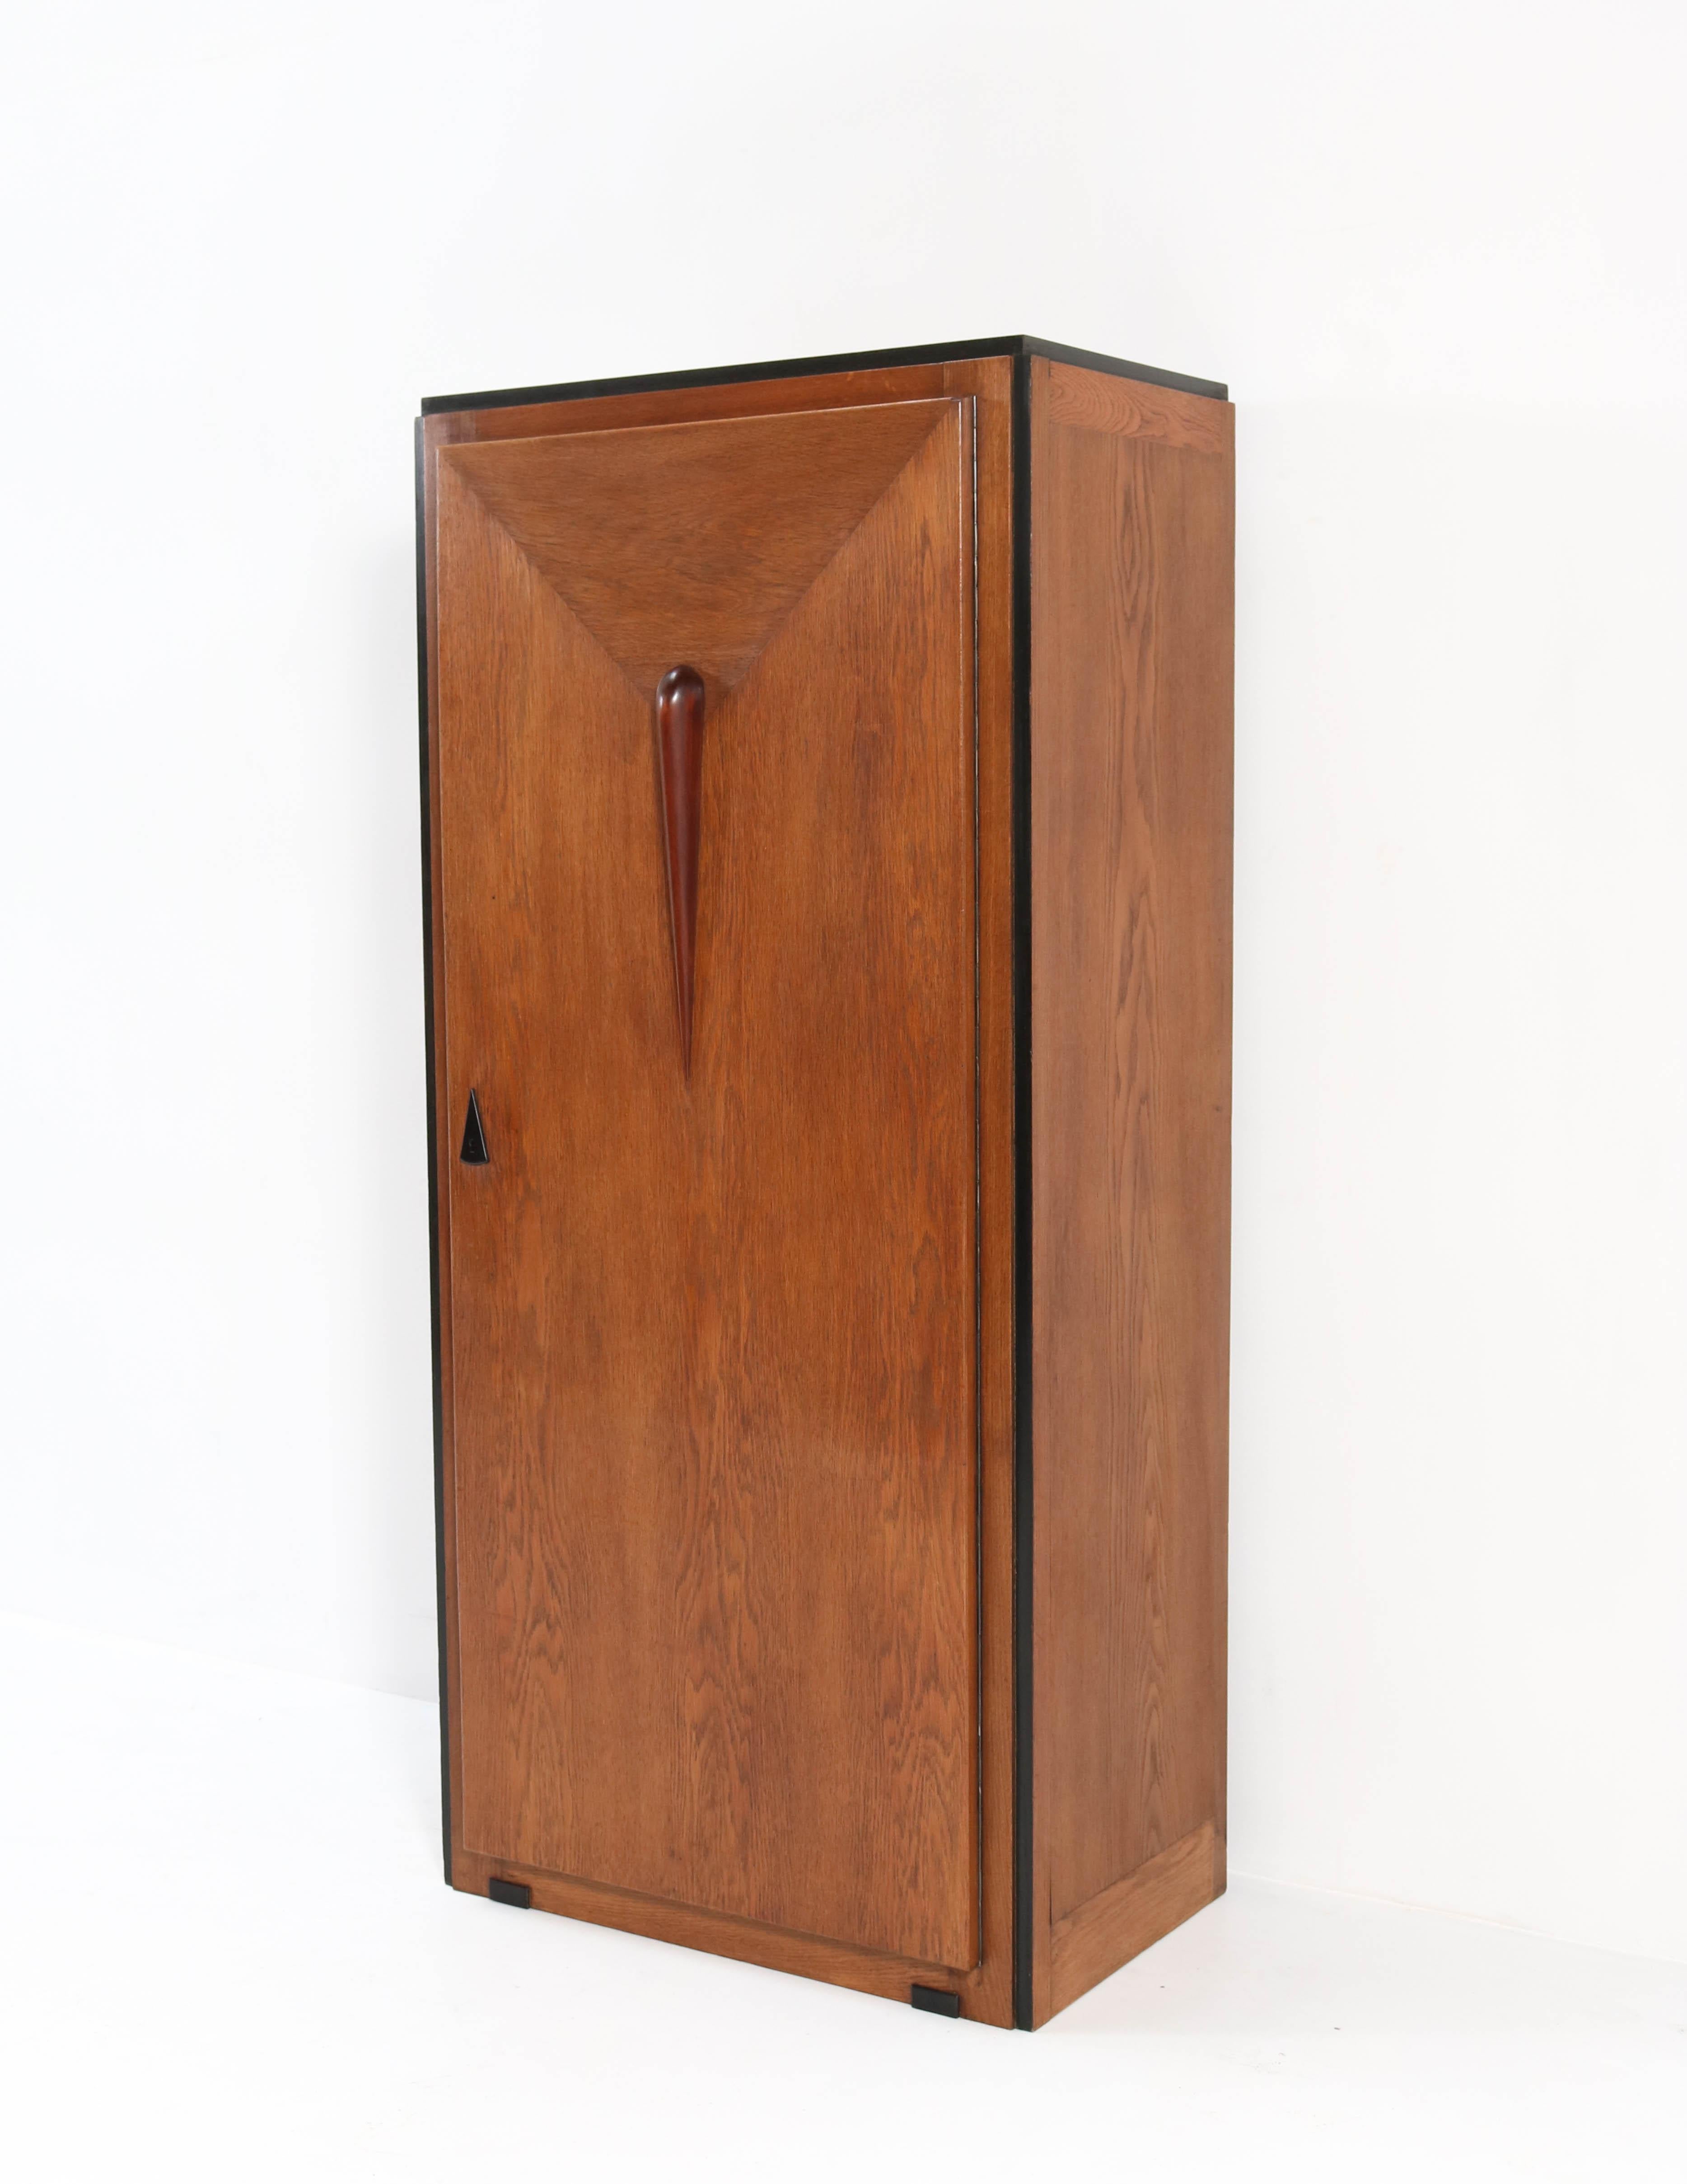 Magnificent and rare Art Deco Amsterdam School armoire or wardrobe.
Striking Dutch design from the 1920s.
Oak and oak veneer with padouk and original black lacquered lining.
This wonderful piece of furniture can be used as a room divider because the